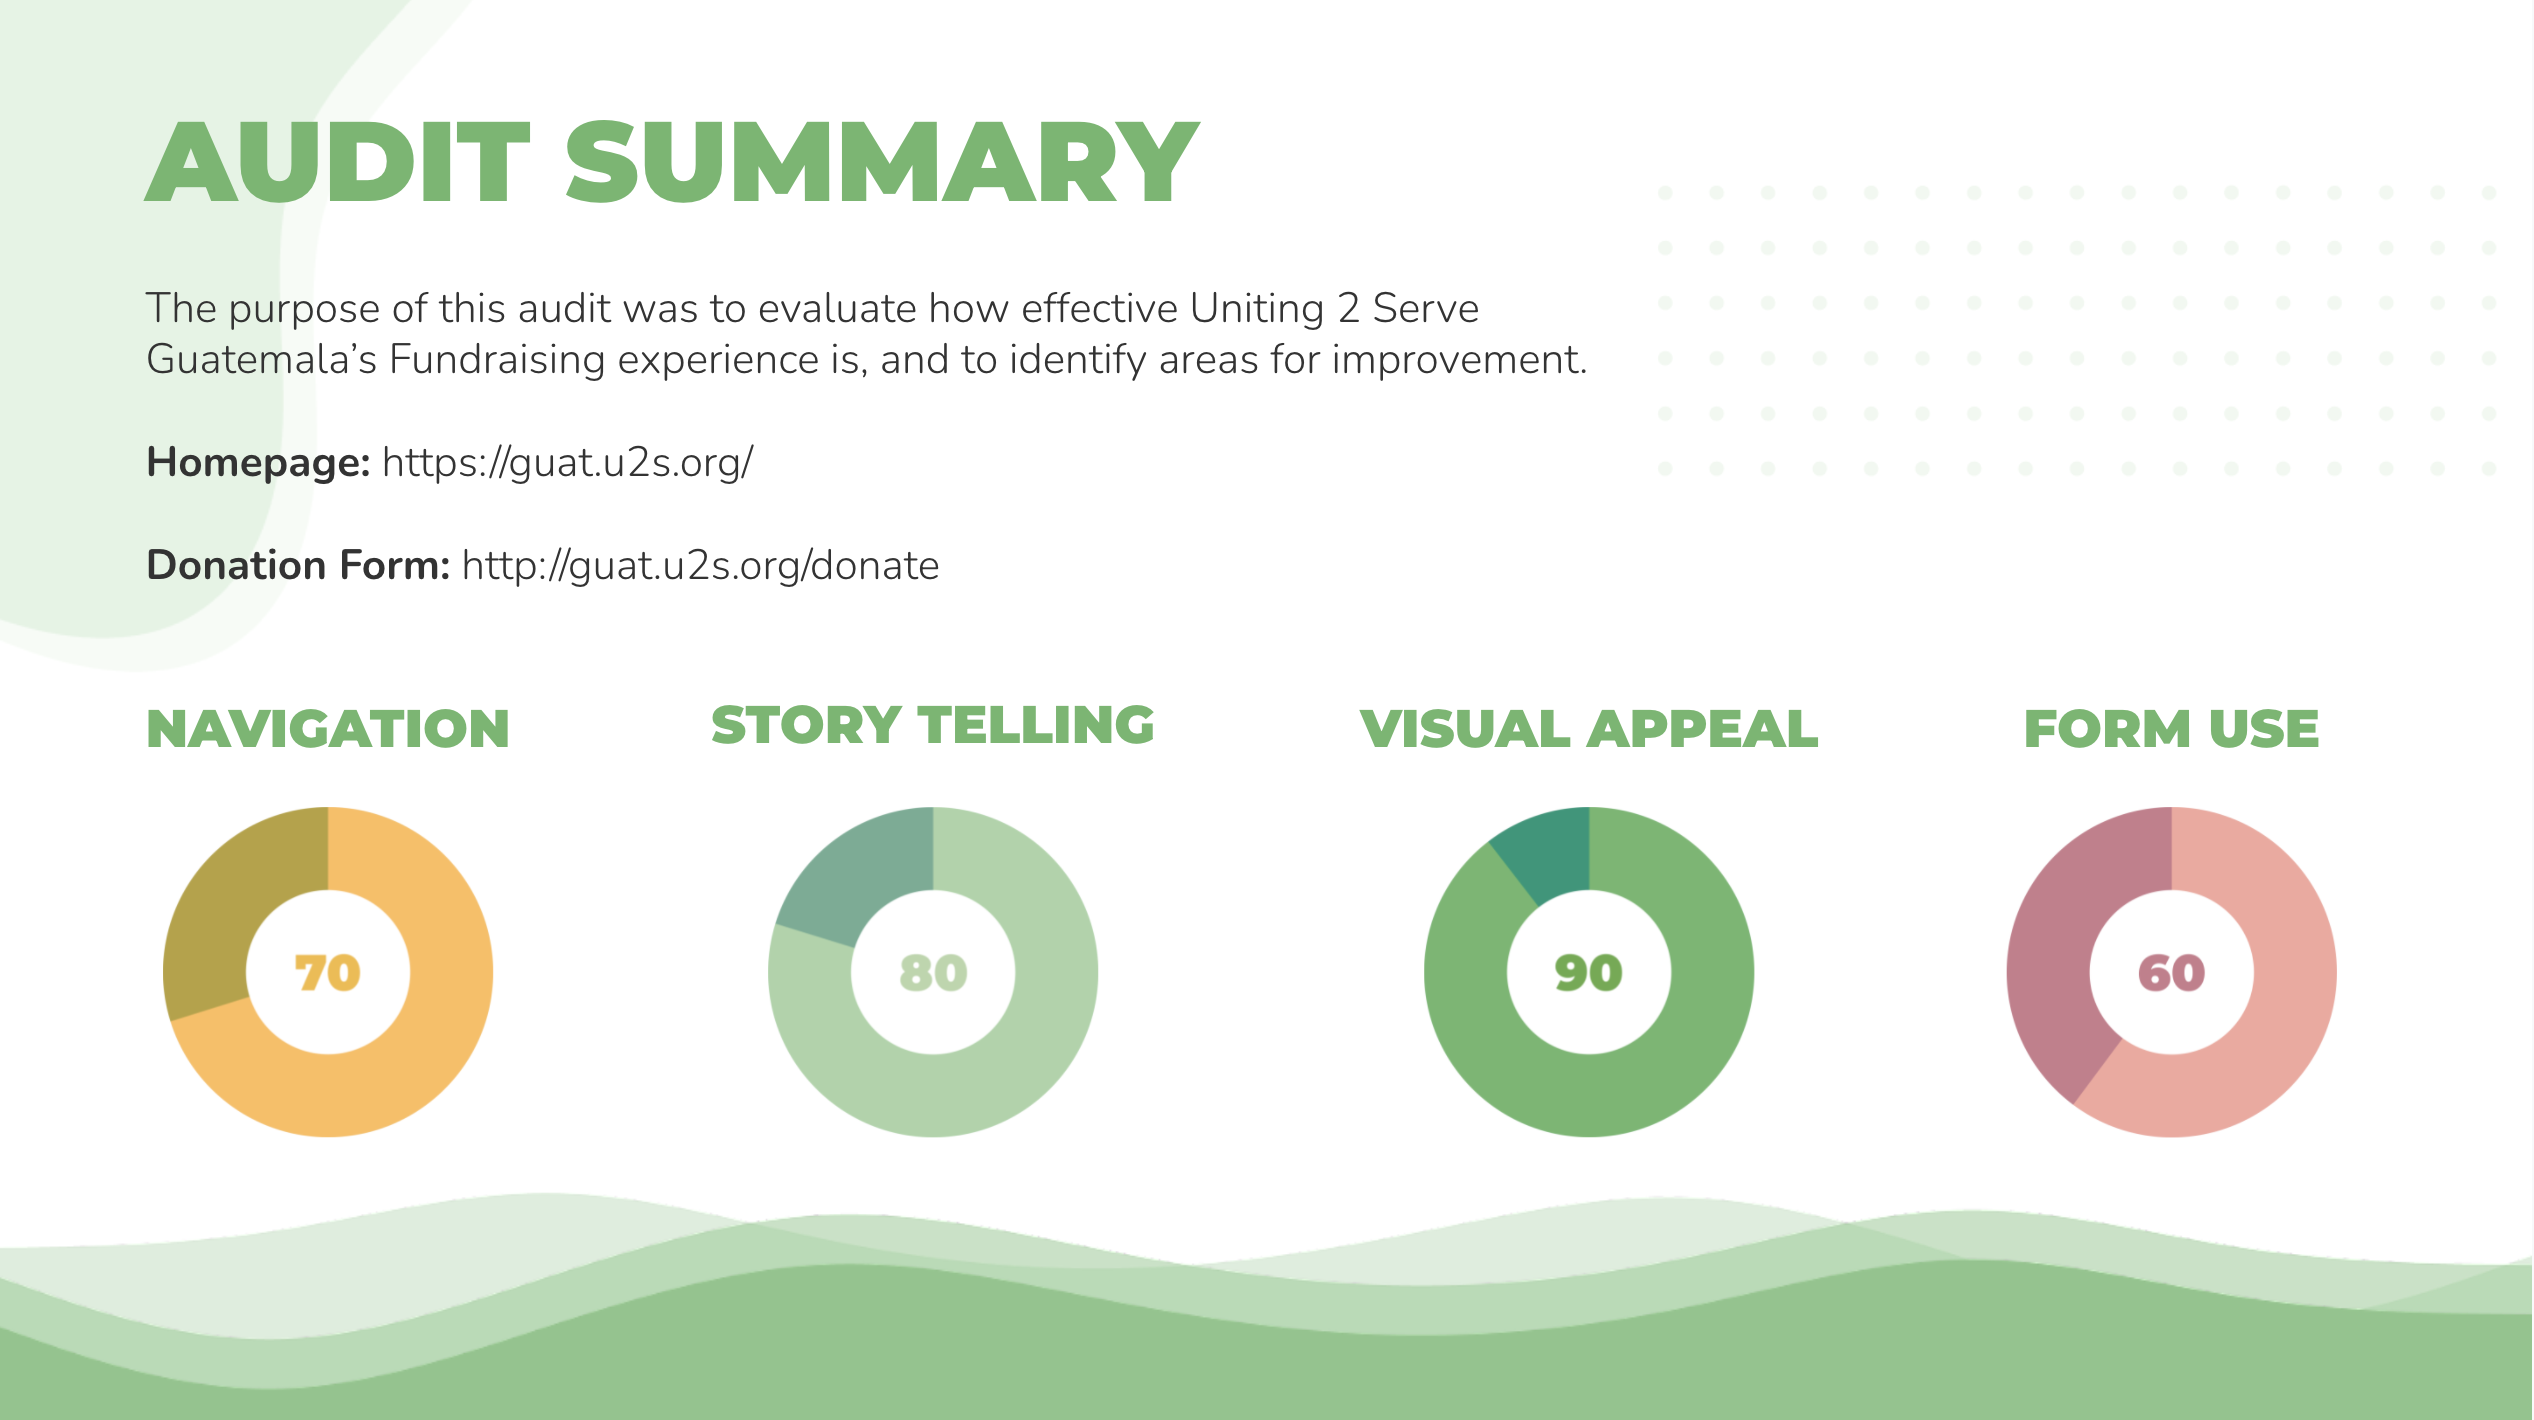 AUDIT SUMMARY: The purpose of this audit was to evaluate how effective Uniting 2 Serve Guatemala’s Fundraising experience is, and to identify areas for improvement. Navigation: 70% Story Telling: 80% Visual Appeal: 90% Form Use: 60%